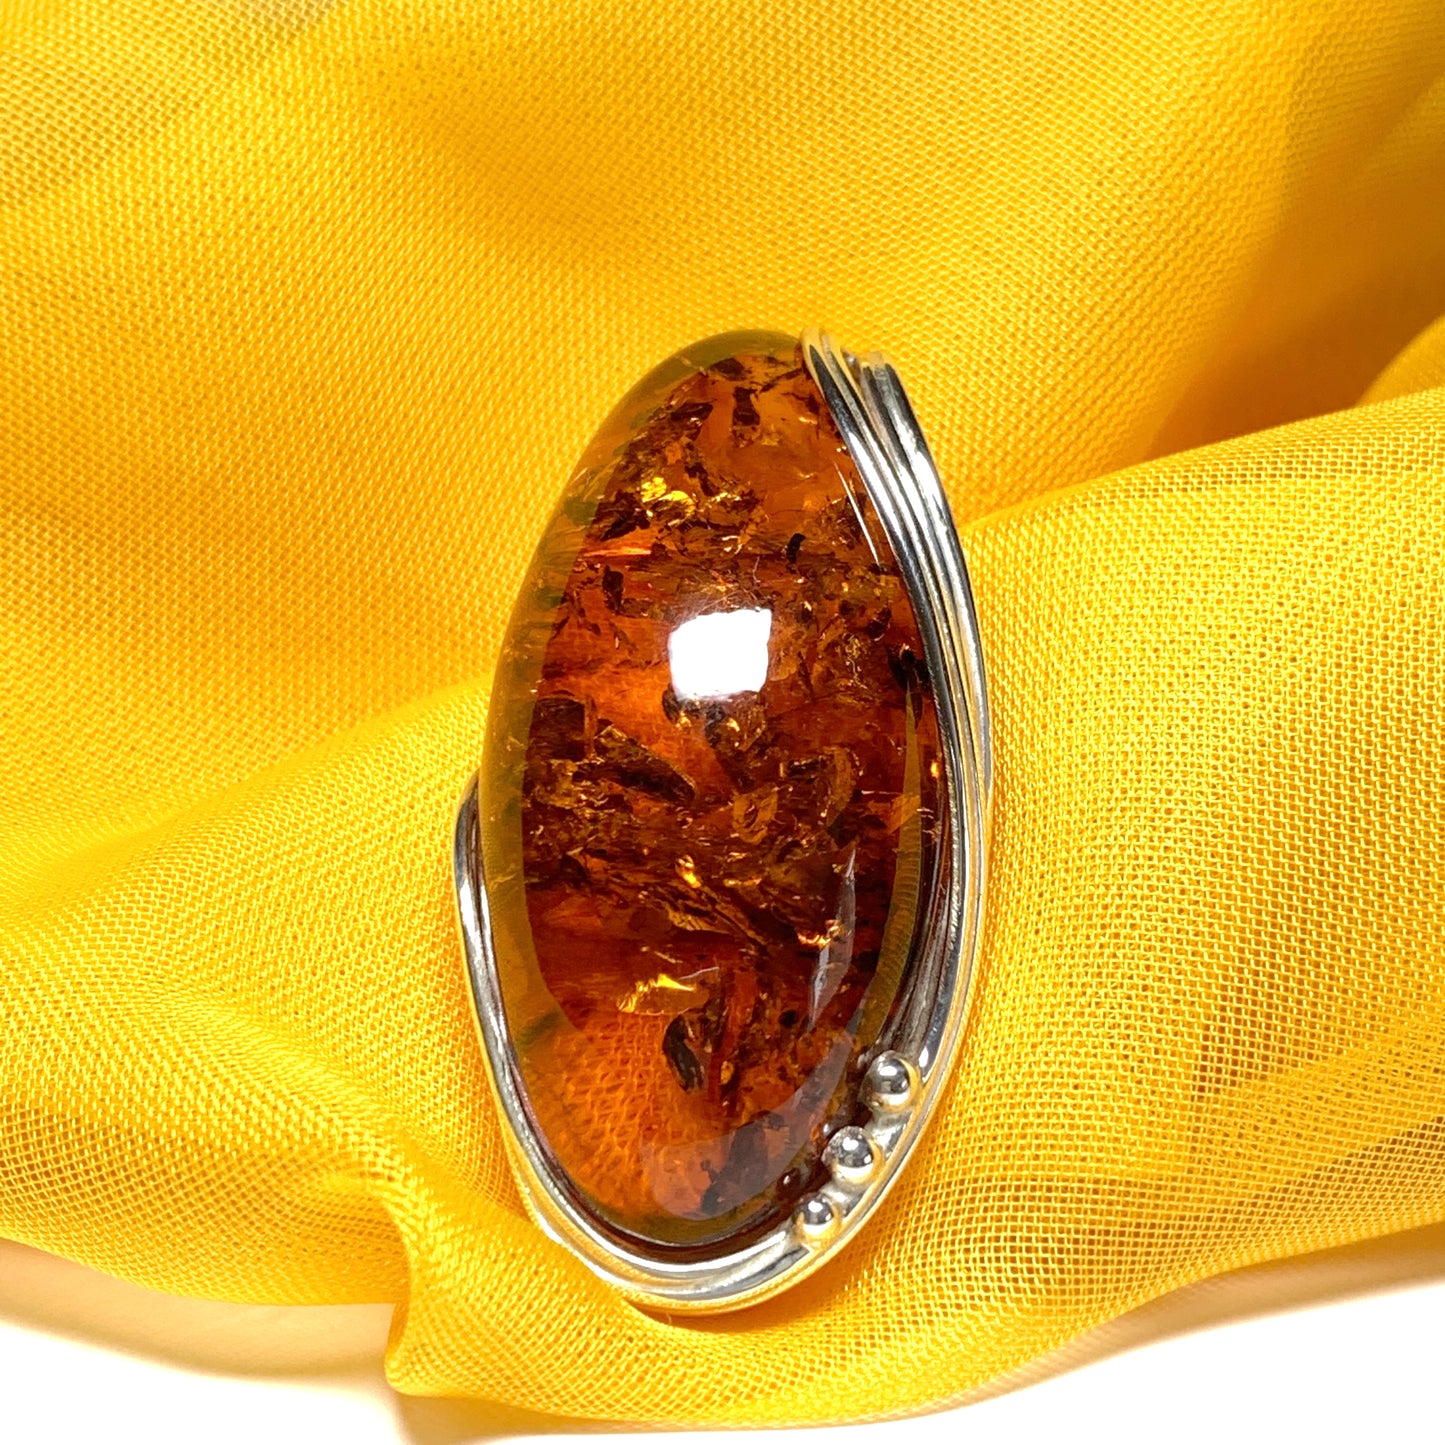 Large oval amber necklace and brooch